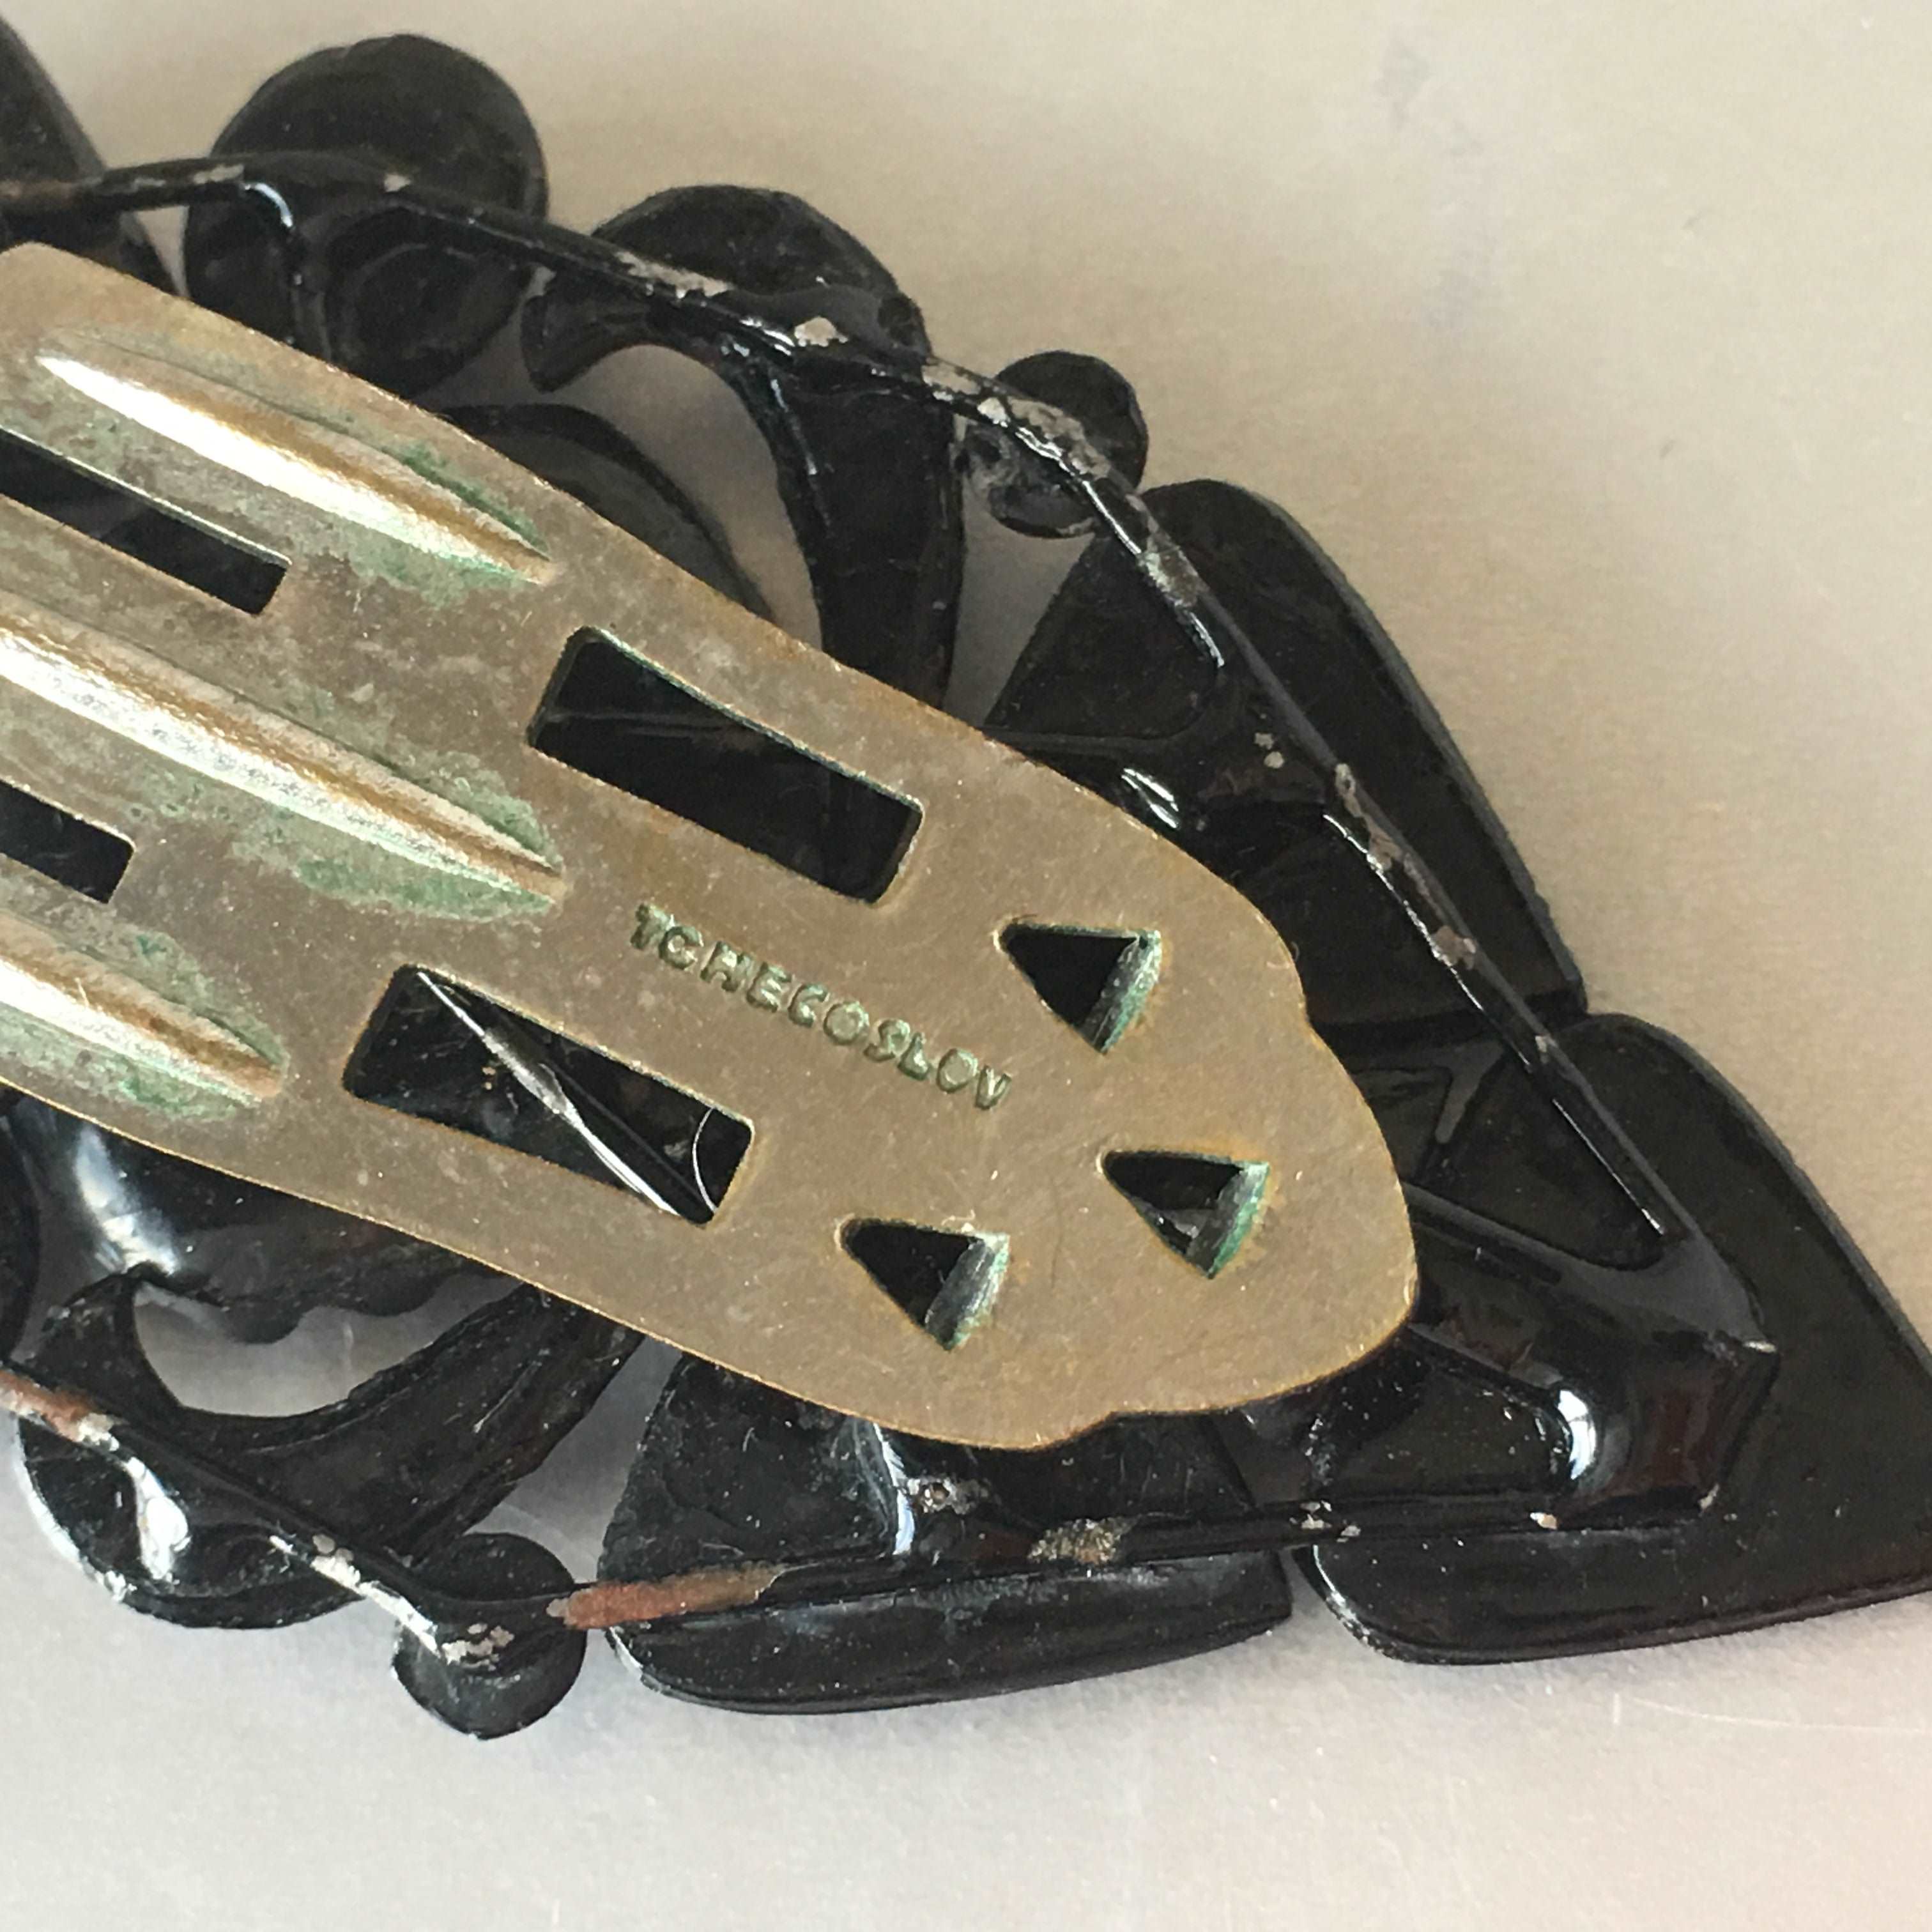 Vintage Art Deco Dress Clip: A Timeless Statement in Sustainable Fashion